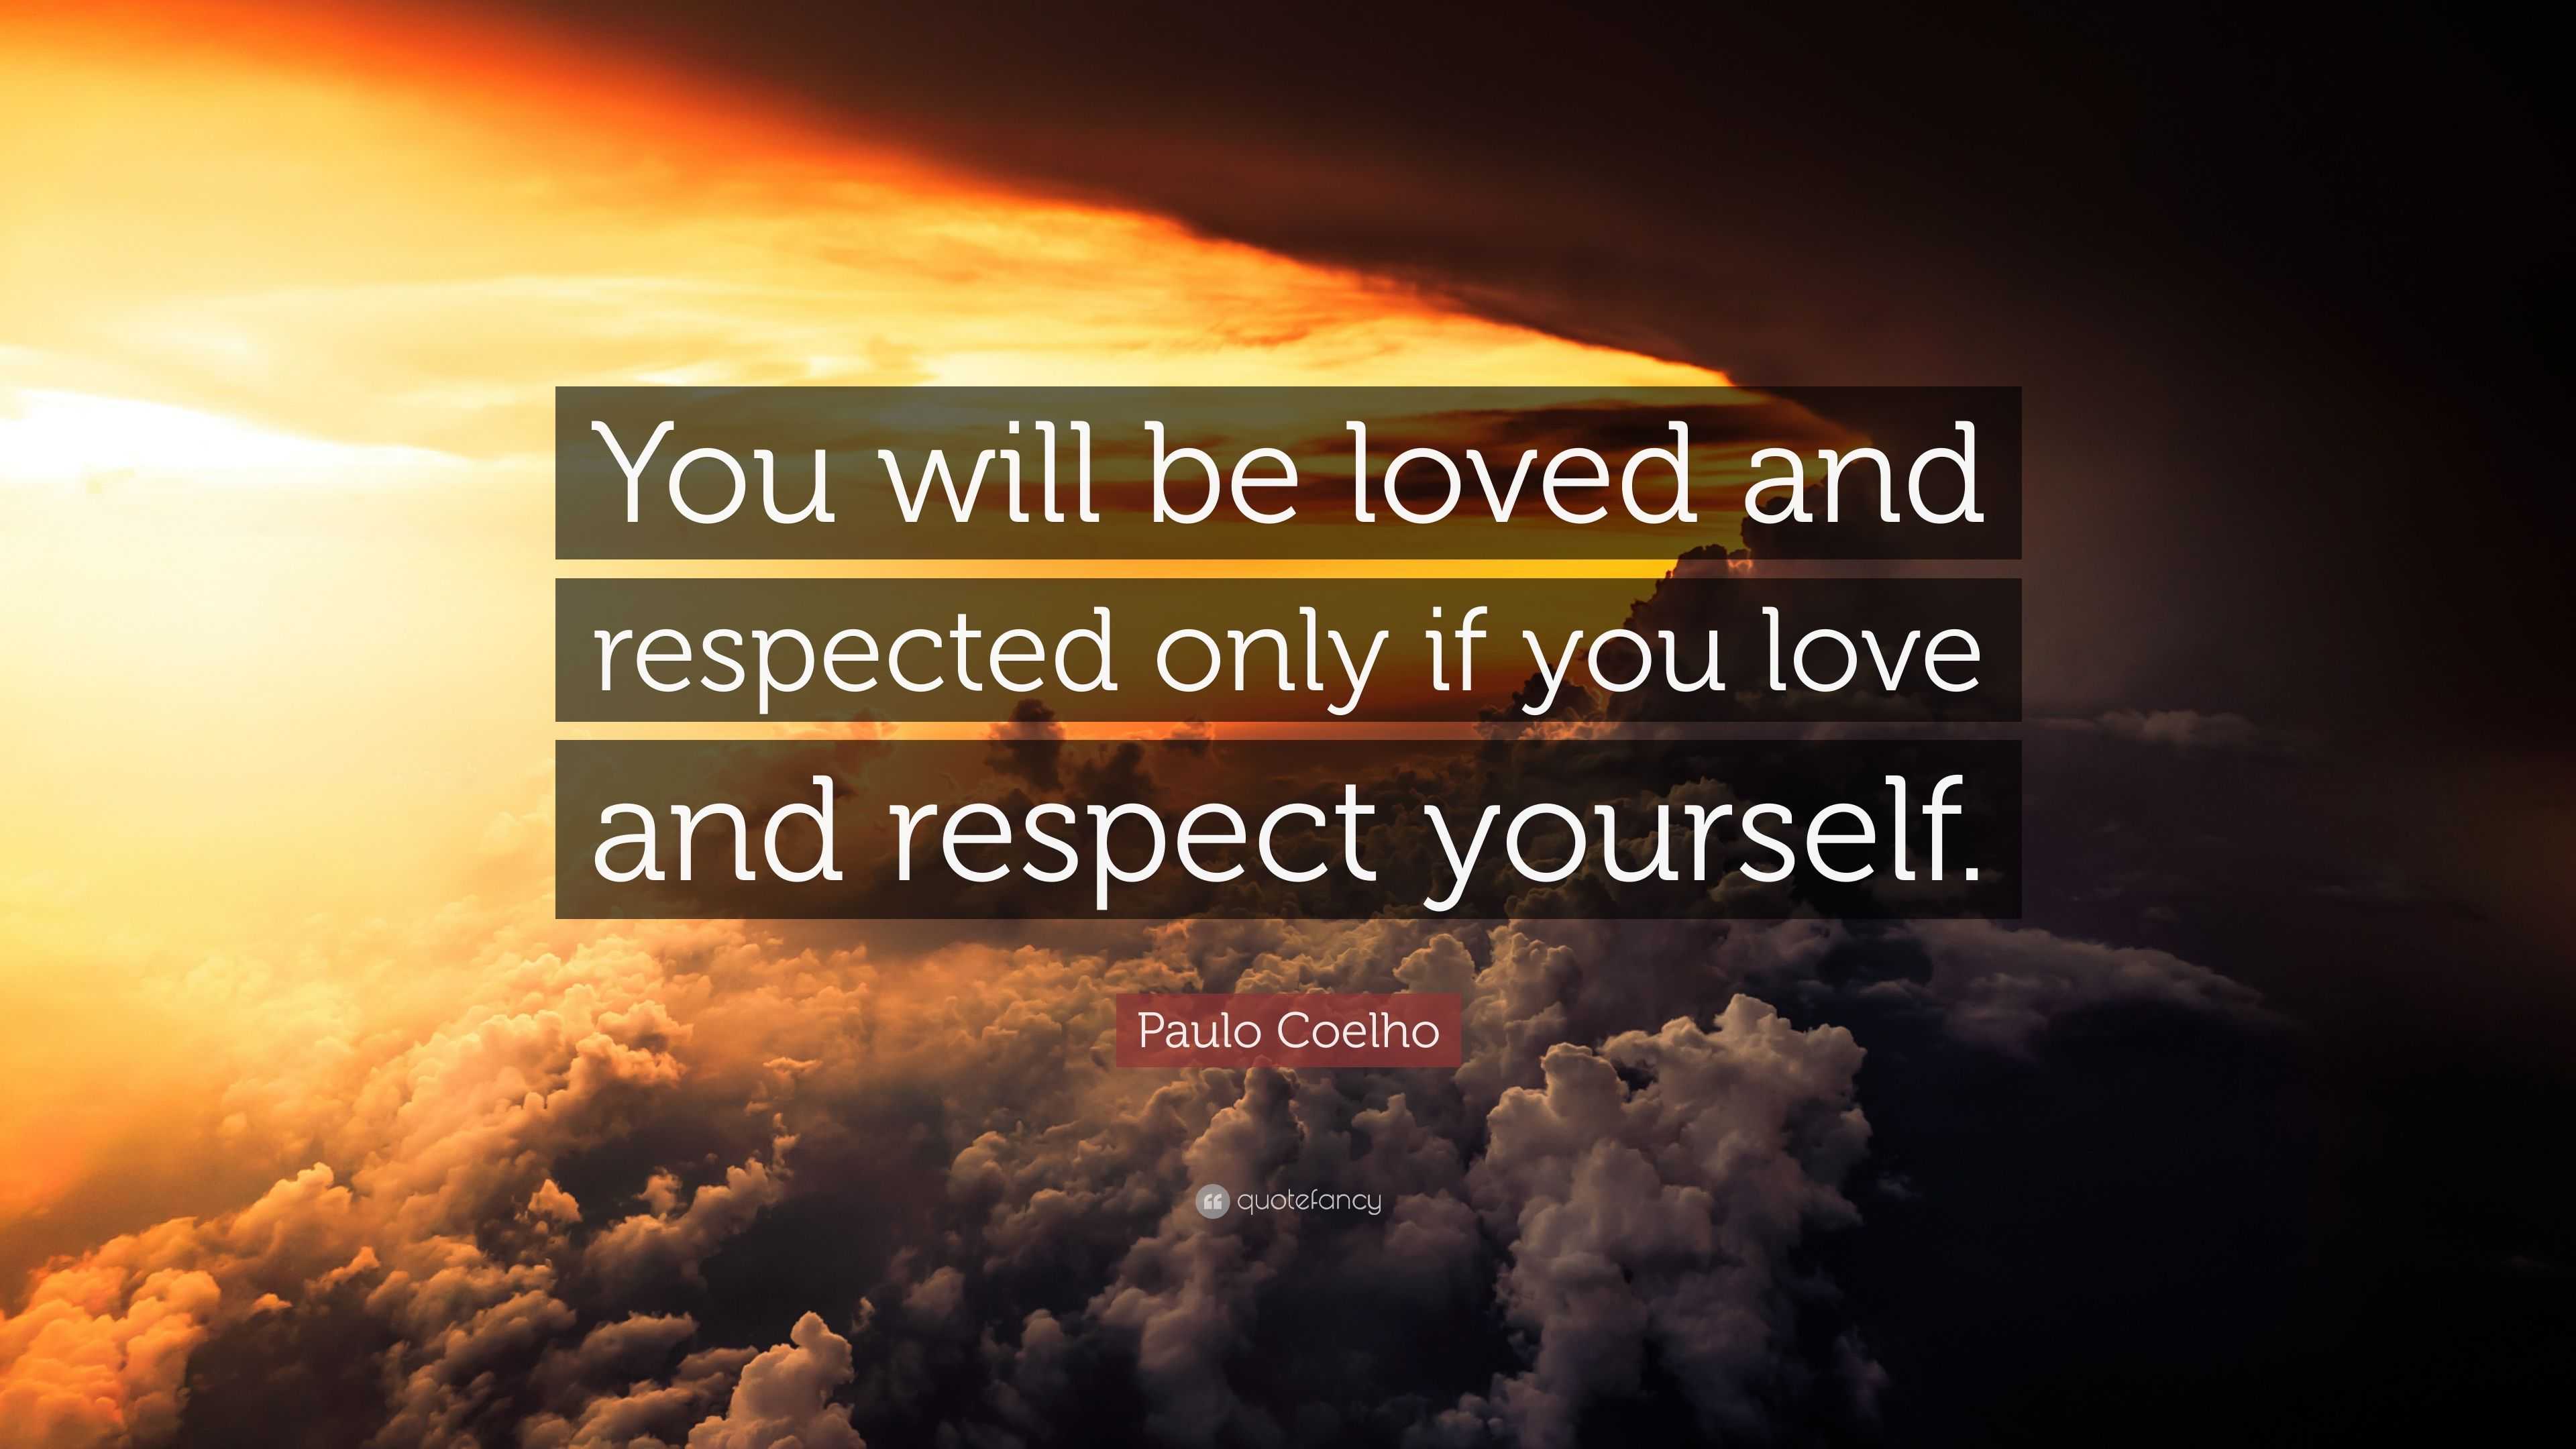 Paulo Coelho Quote  You will be loved and respected only 